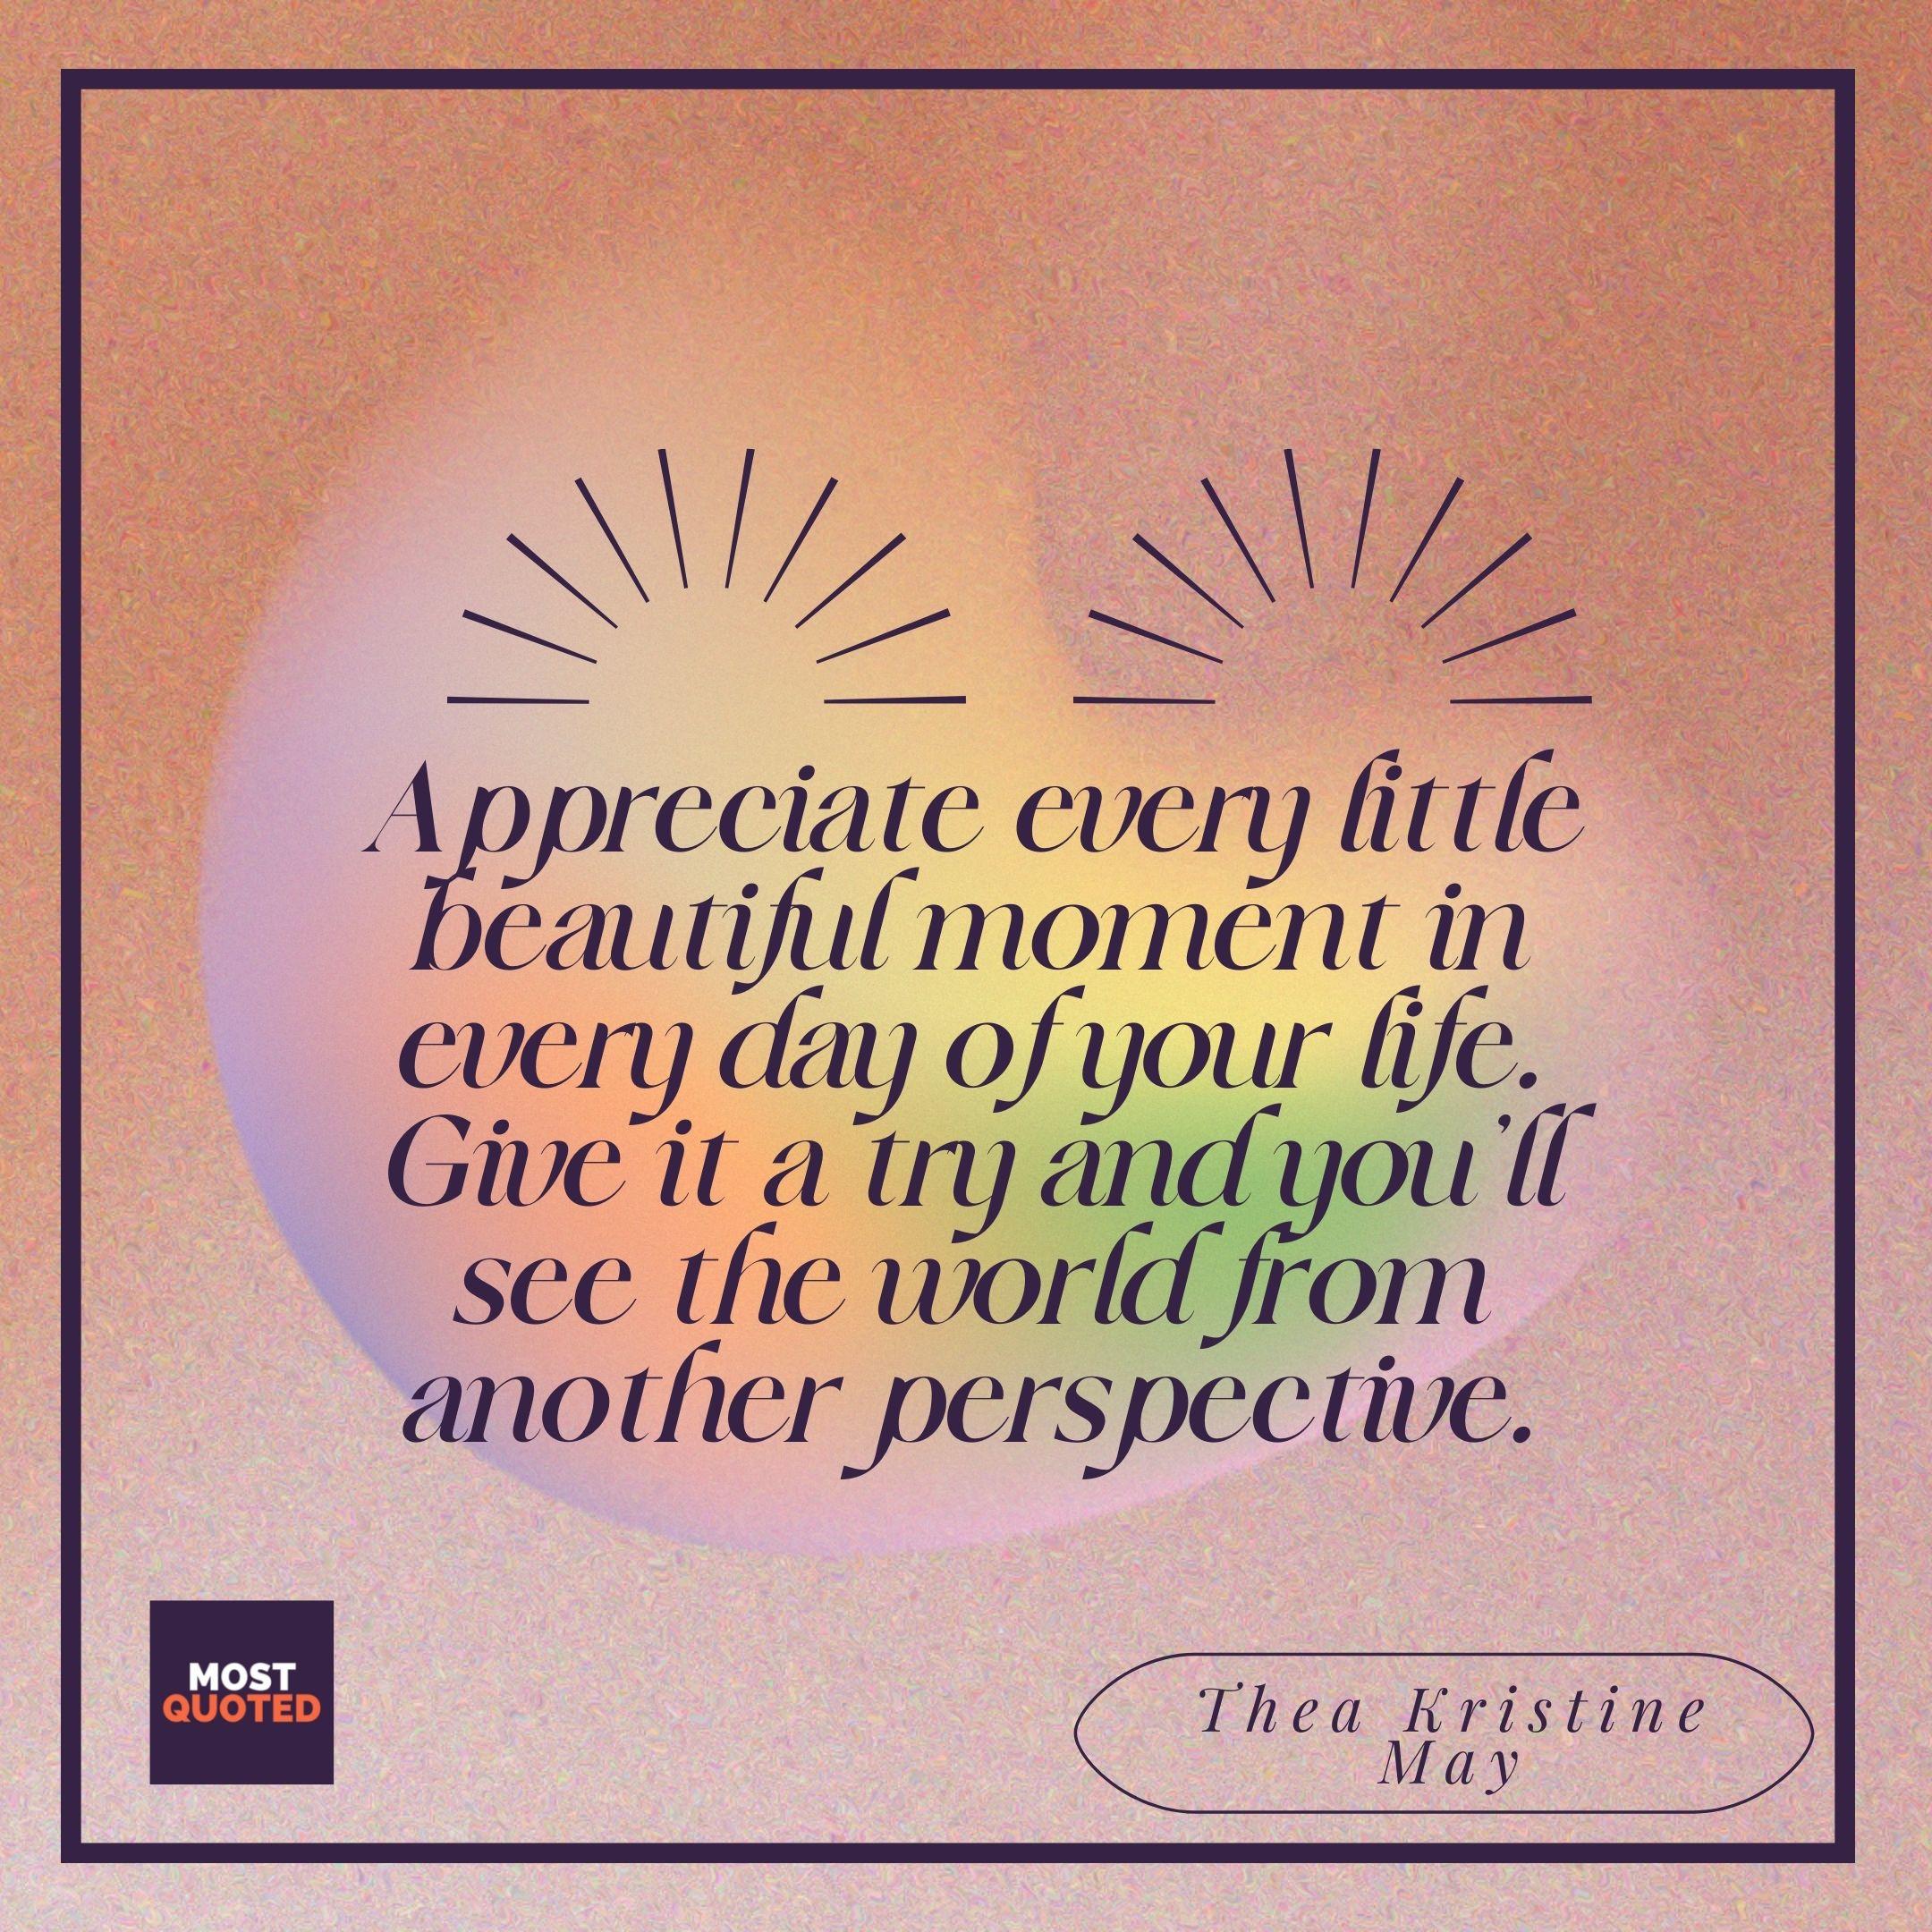 Appreciate every little beautiful moment in every day of your life. Give it a try and you’ll see the world from another perspective. - Thea Kristine May